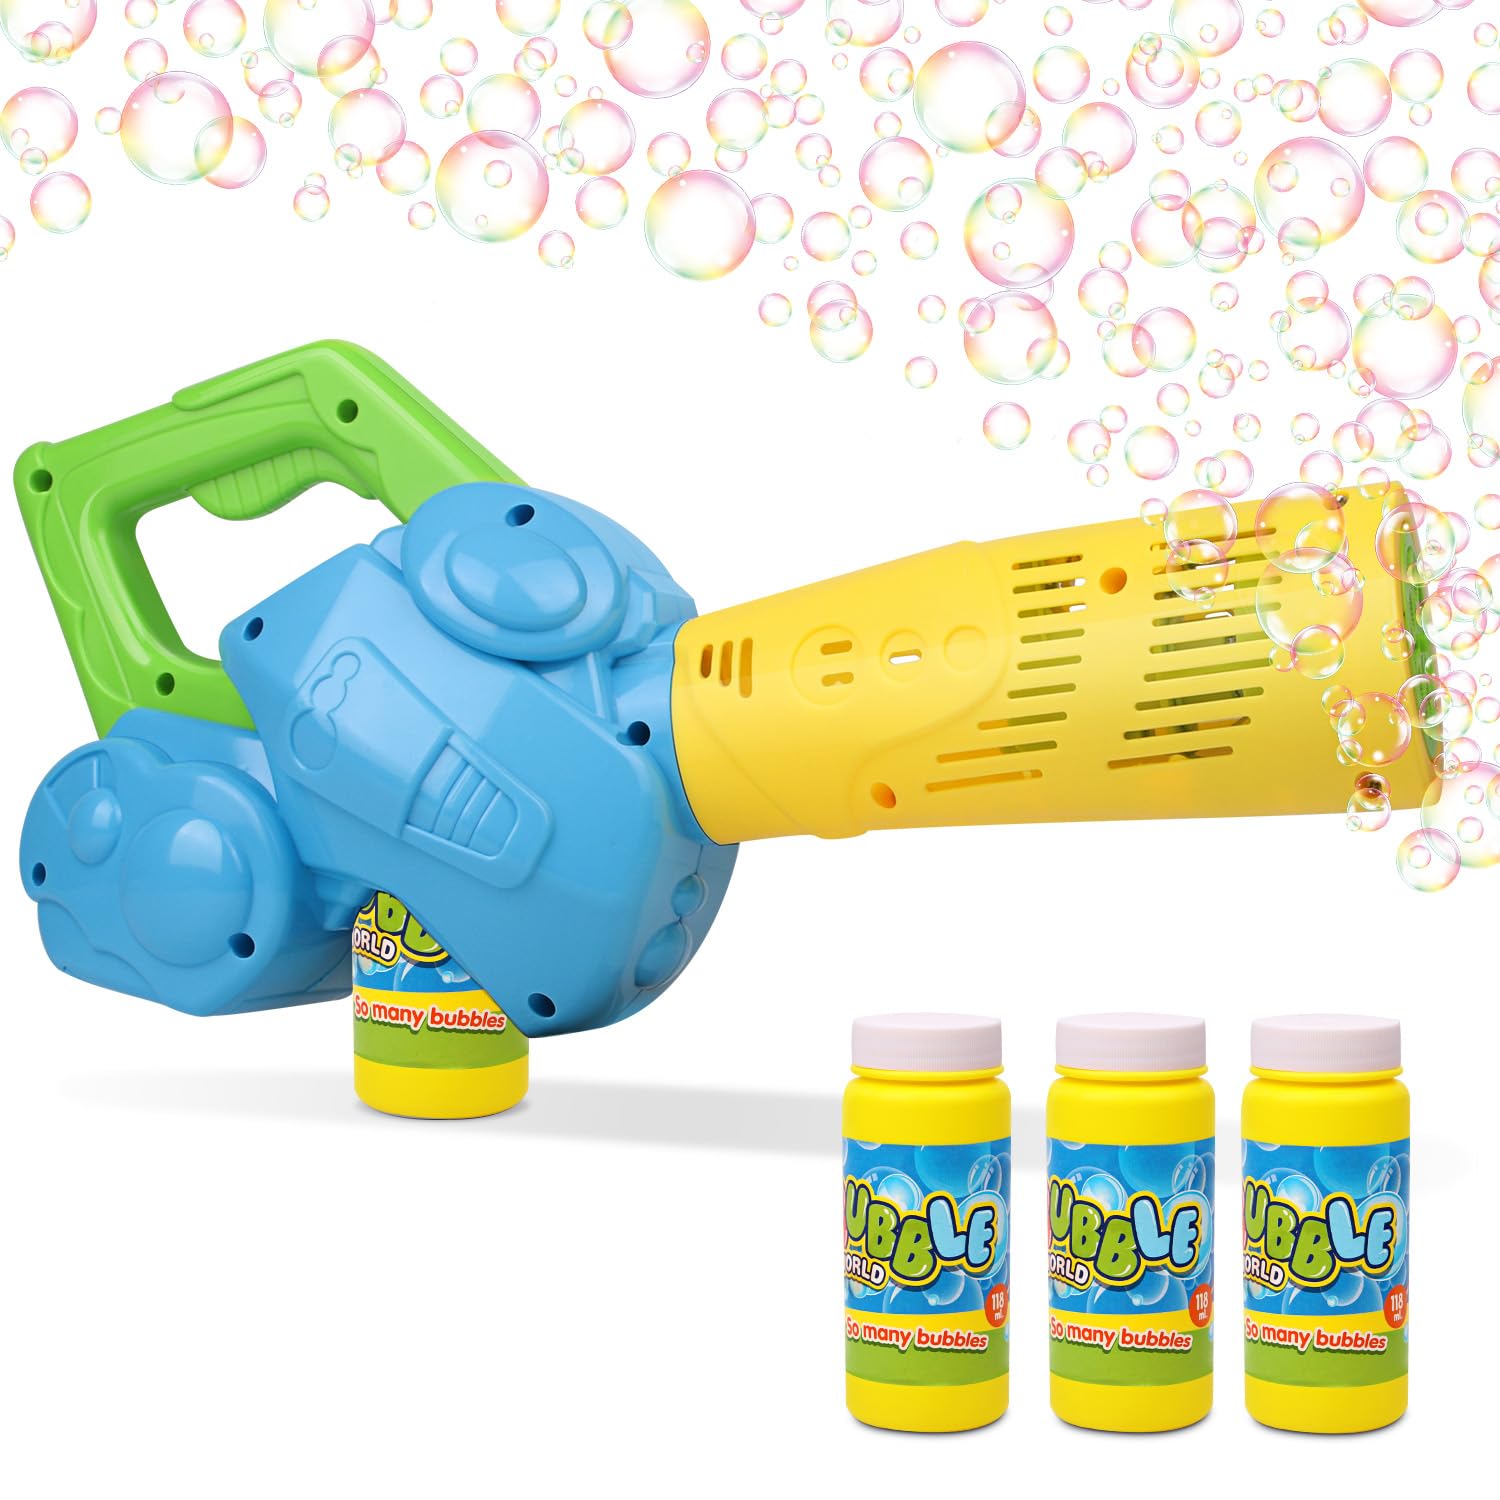 Duckura Bubble Leaf Blower for Toddlers, Kids Bubble Blower Machine with 3 Bubble Solution, Summer Outdoor Toys, Halloween Party